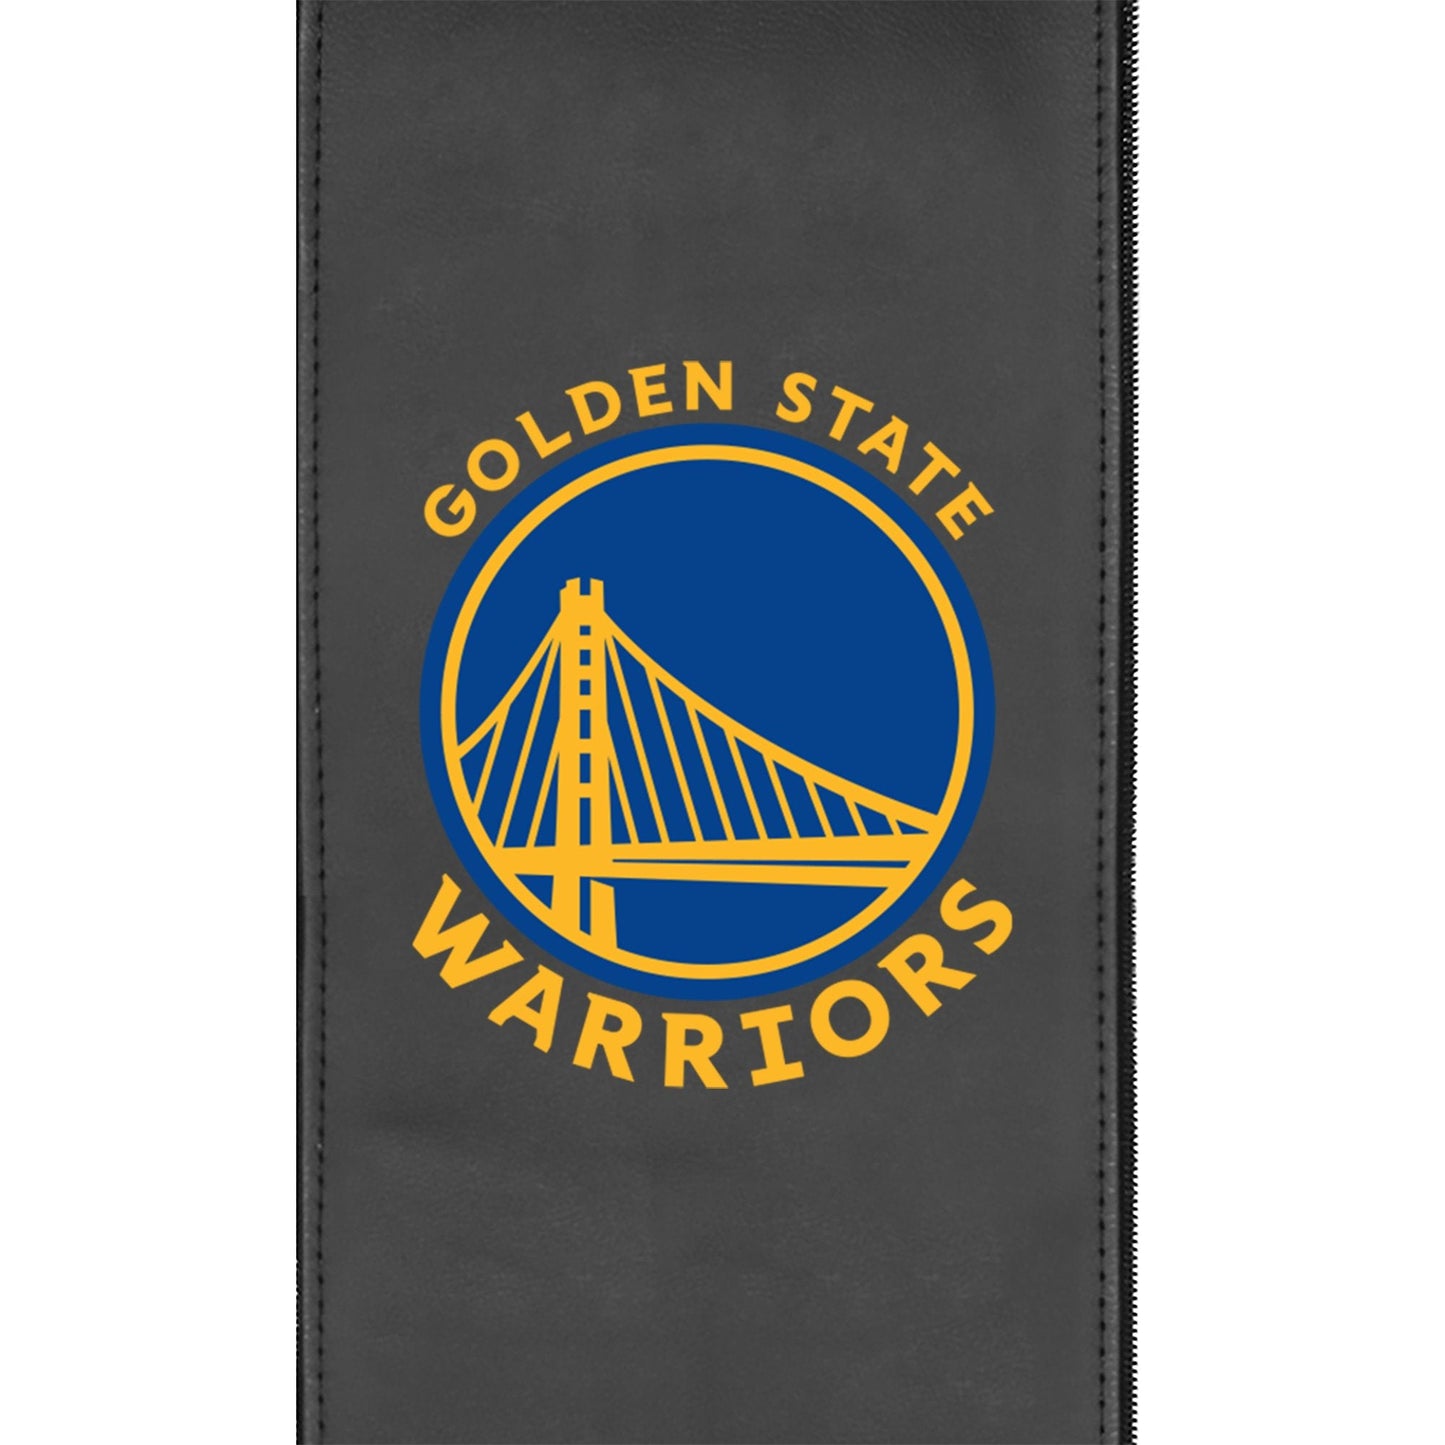 Game Rocker 100 with Golden State Warriors Global Logo